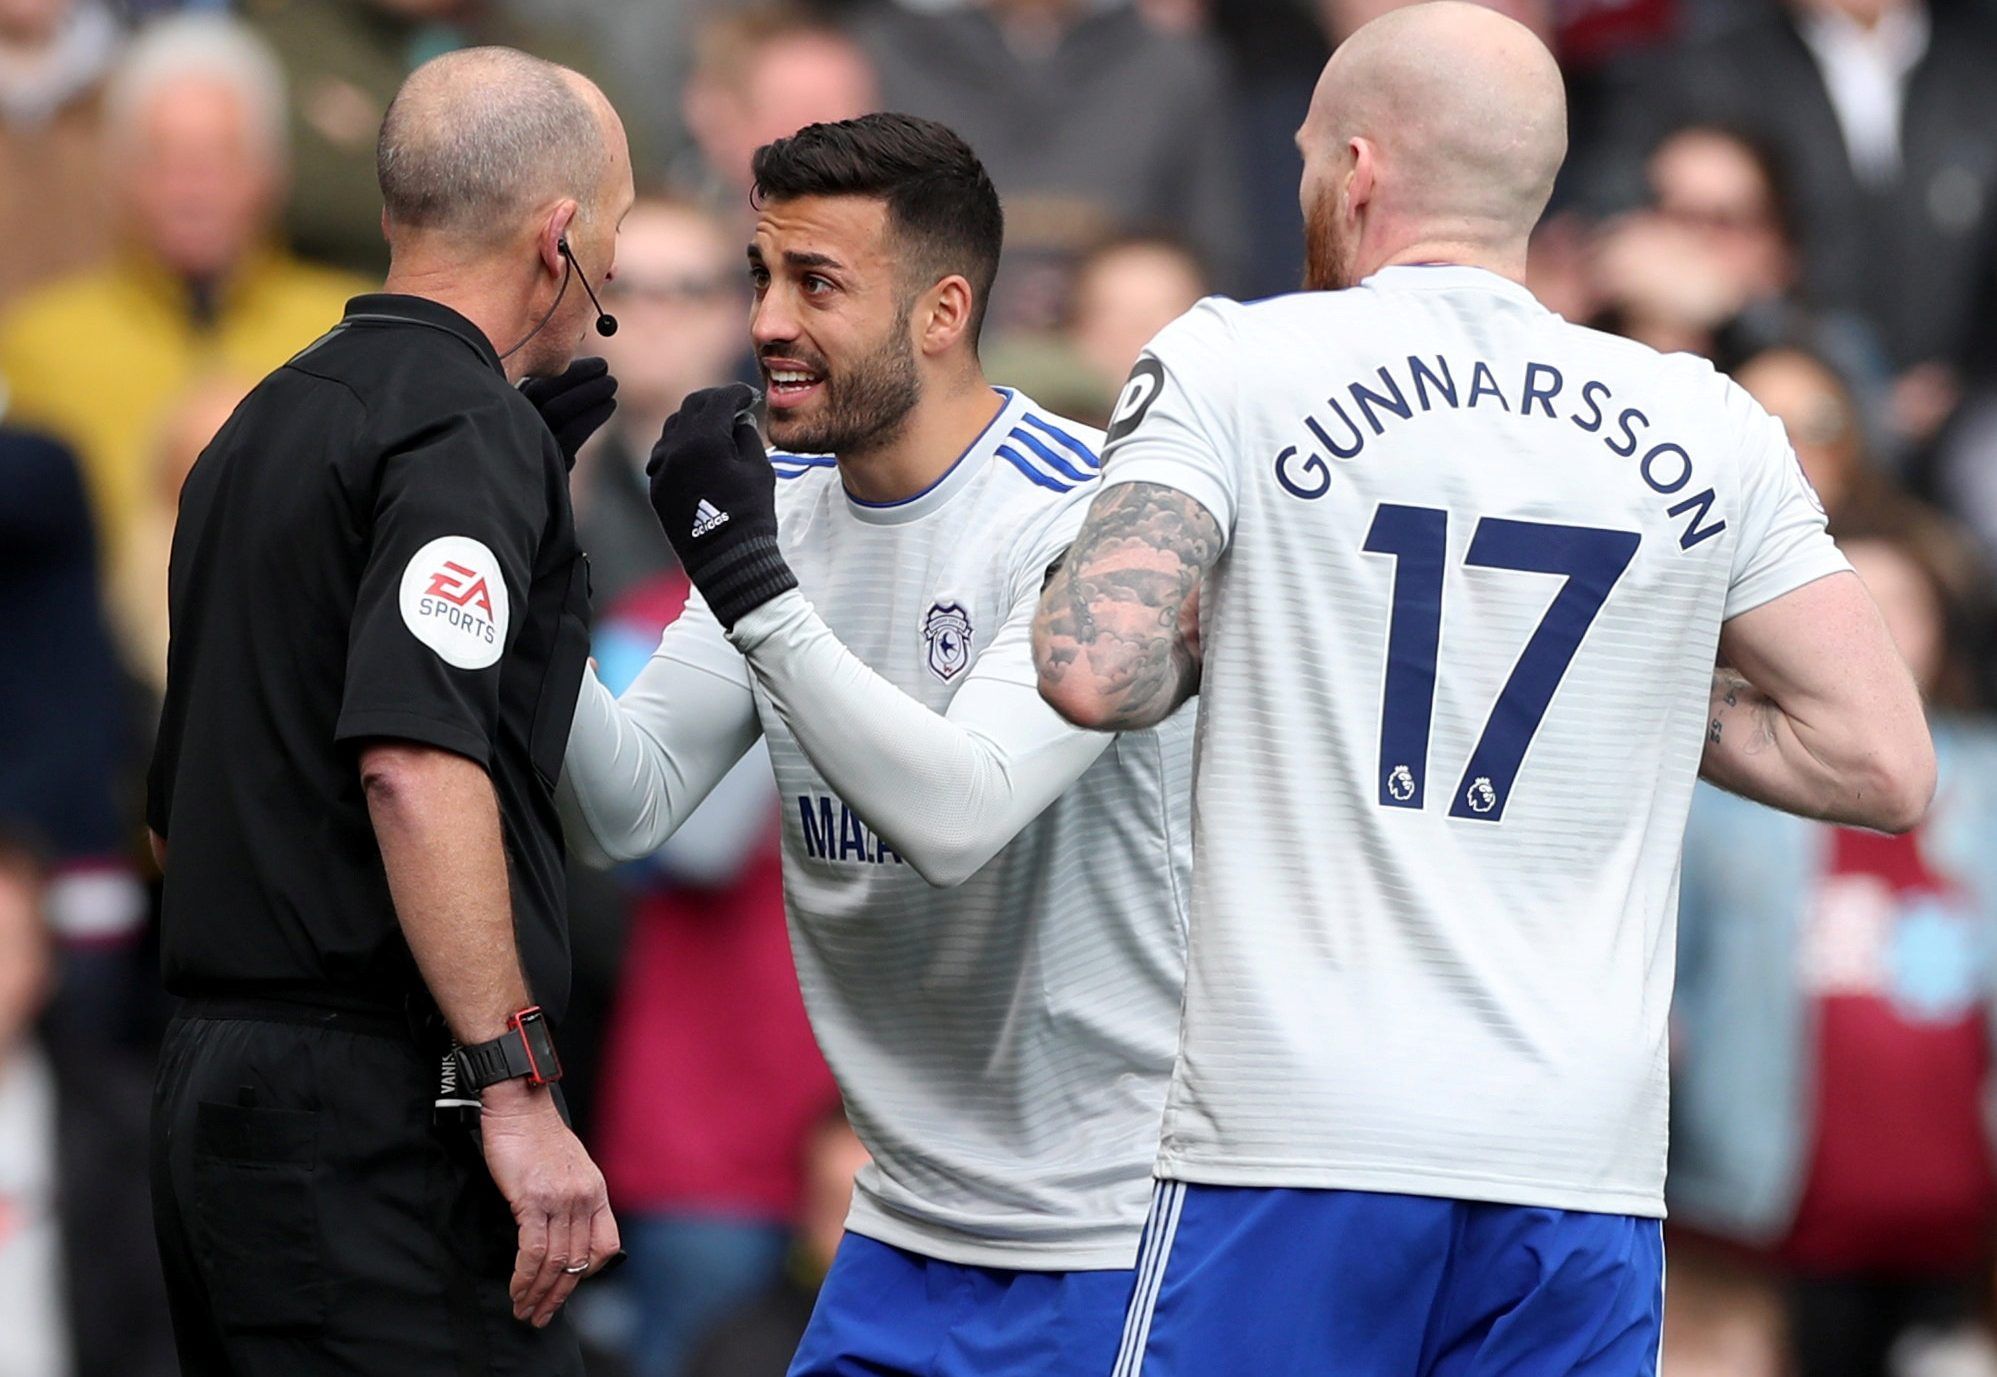 Soccer Football - Premier League - Burnley v Cardiff City - Turf Moor, Burnley, Britain - April 13, 2019  Cardiff City's Victor Camarasa remonstrates with referee Mike Dean         Action Images via Reuters/Lee Smith  EDITORIAL USE ONLY. No use with unauthorized audio, video, data, fixture lists, club/league logos or 